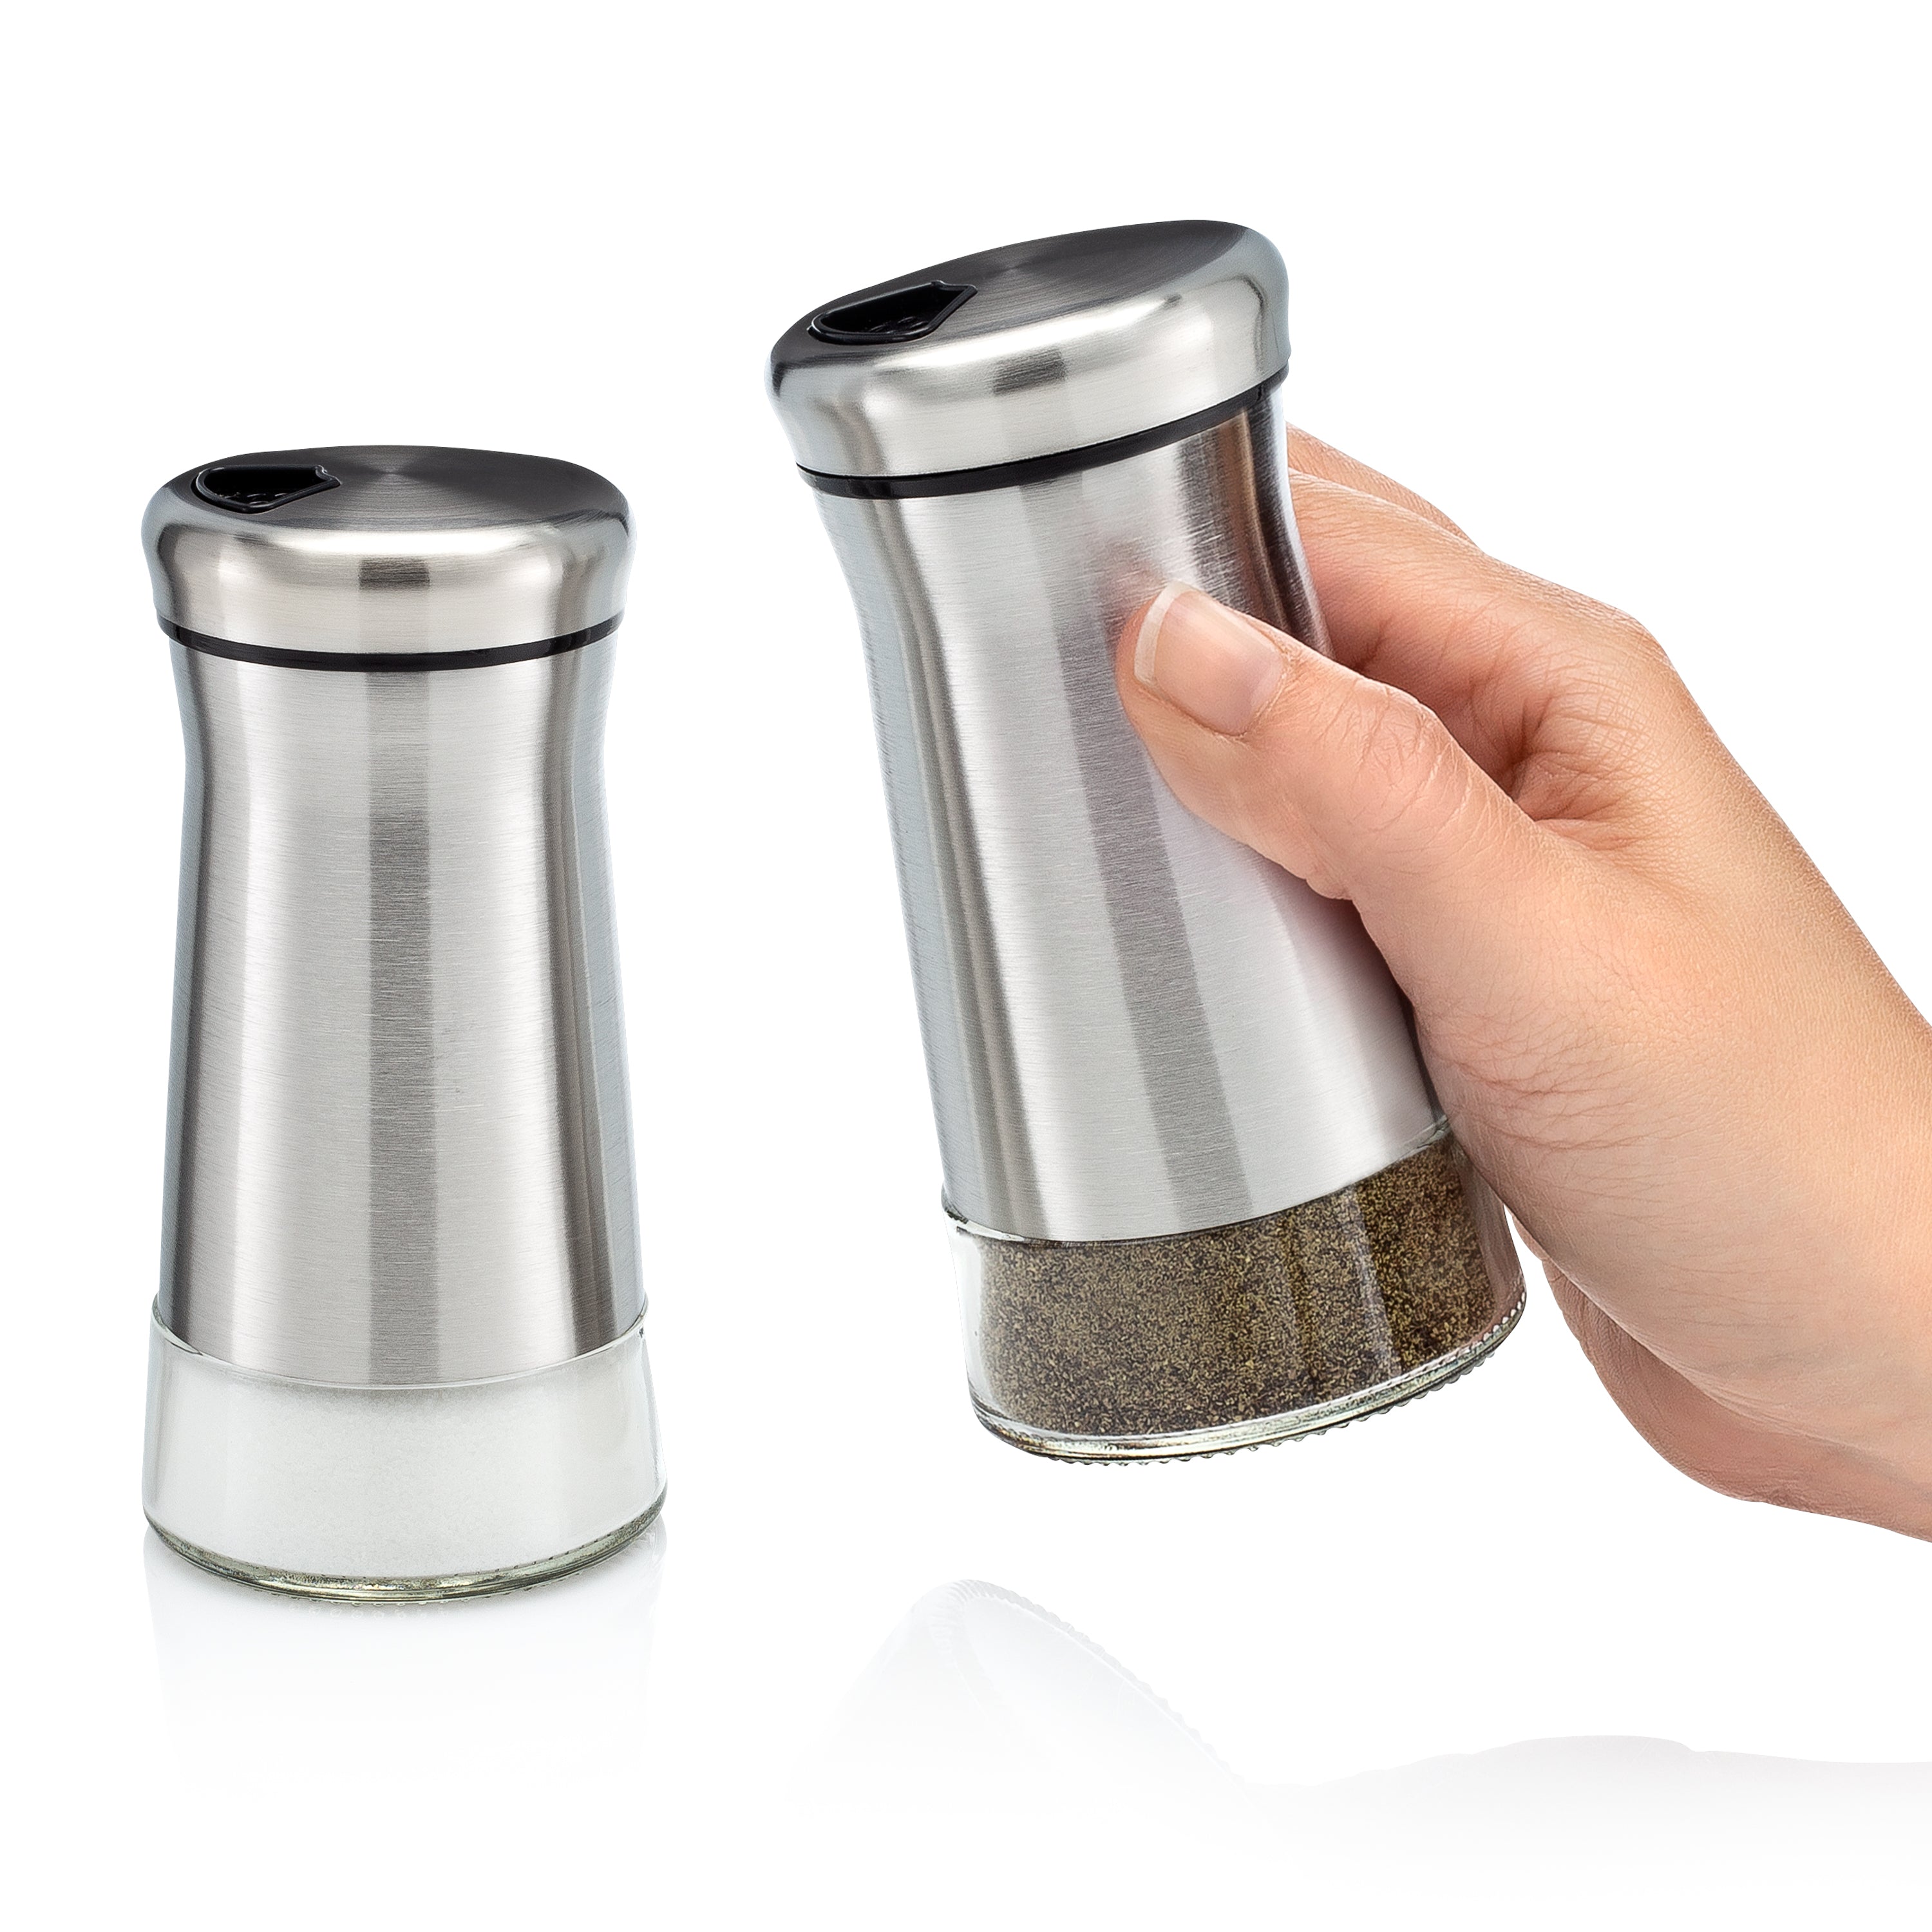 Salt and Pepper Shakers Set with Adjustable Pour Holes - Elegant Stainless Steel Spice Dispenser - Perfect for Himalayan, Table Salt, White and